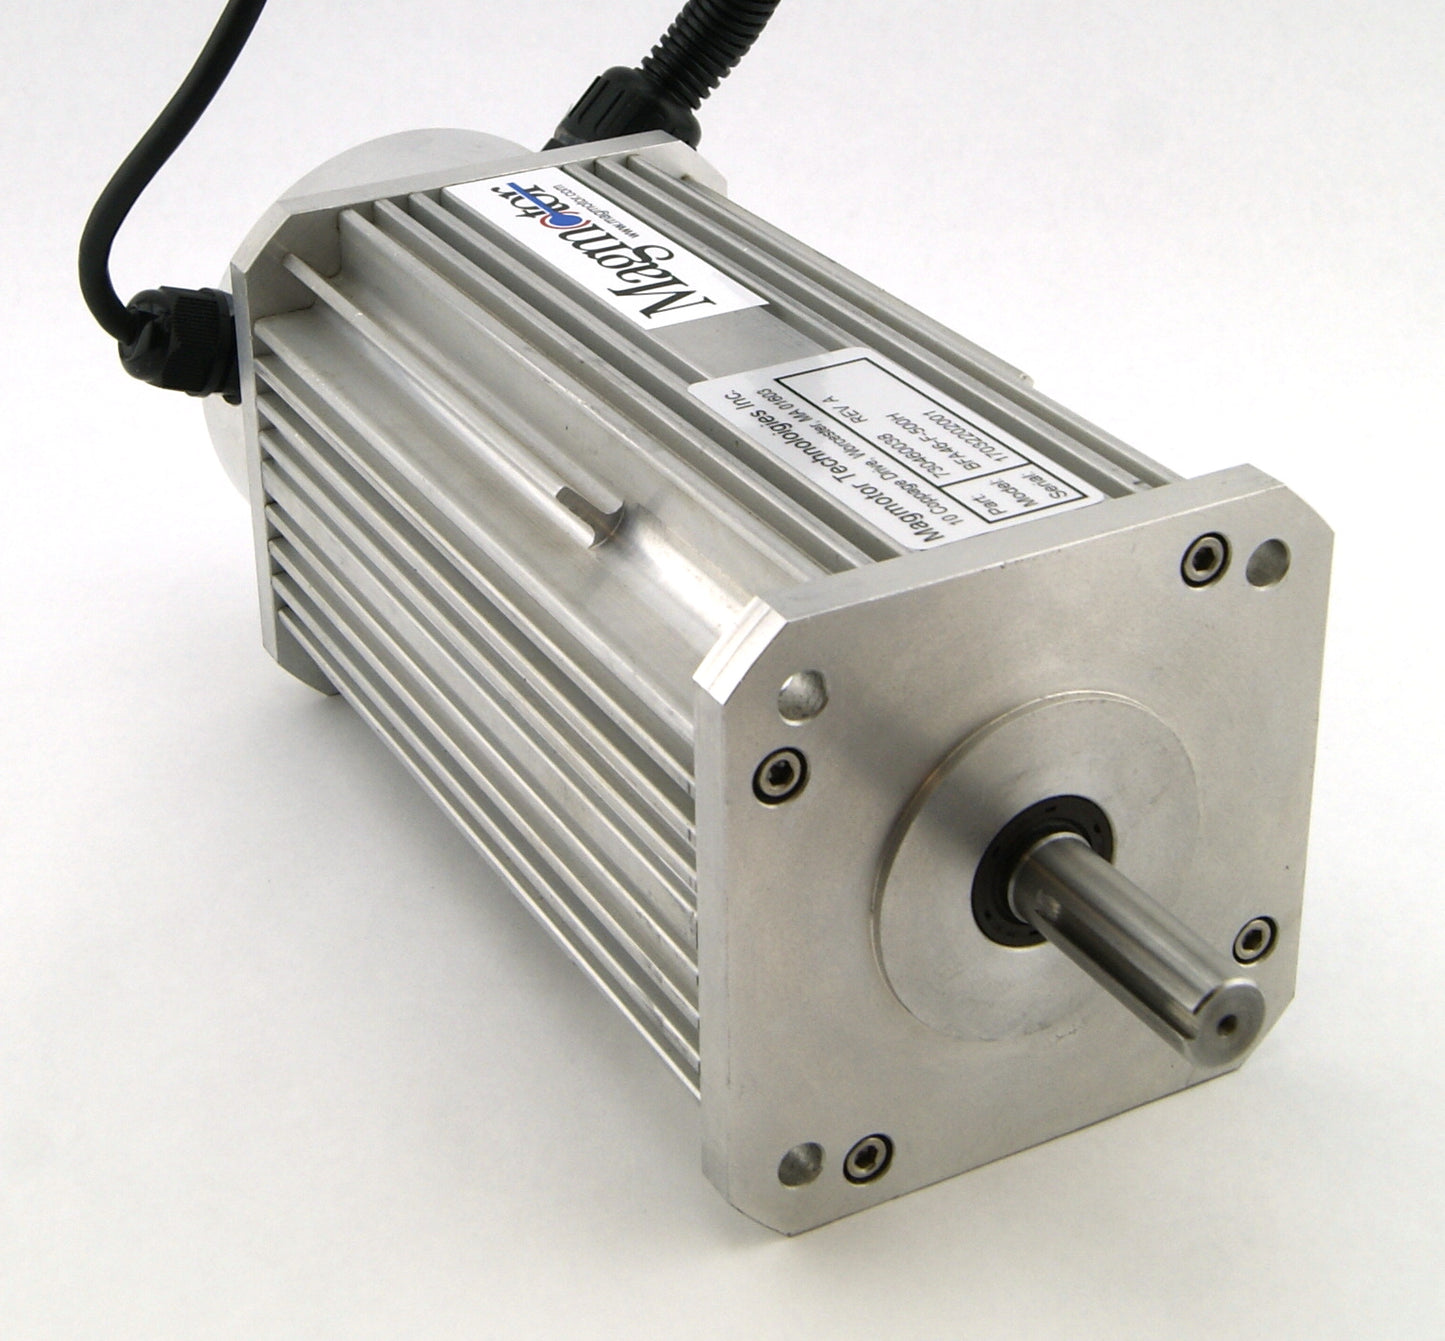 Magmotor BFA46-F-500H 100 to 168 Volt 8 Pole Brushless Motor 730460038 Front View